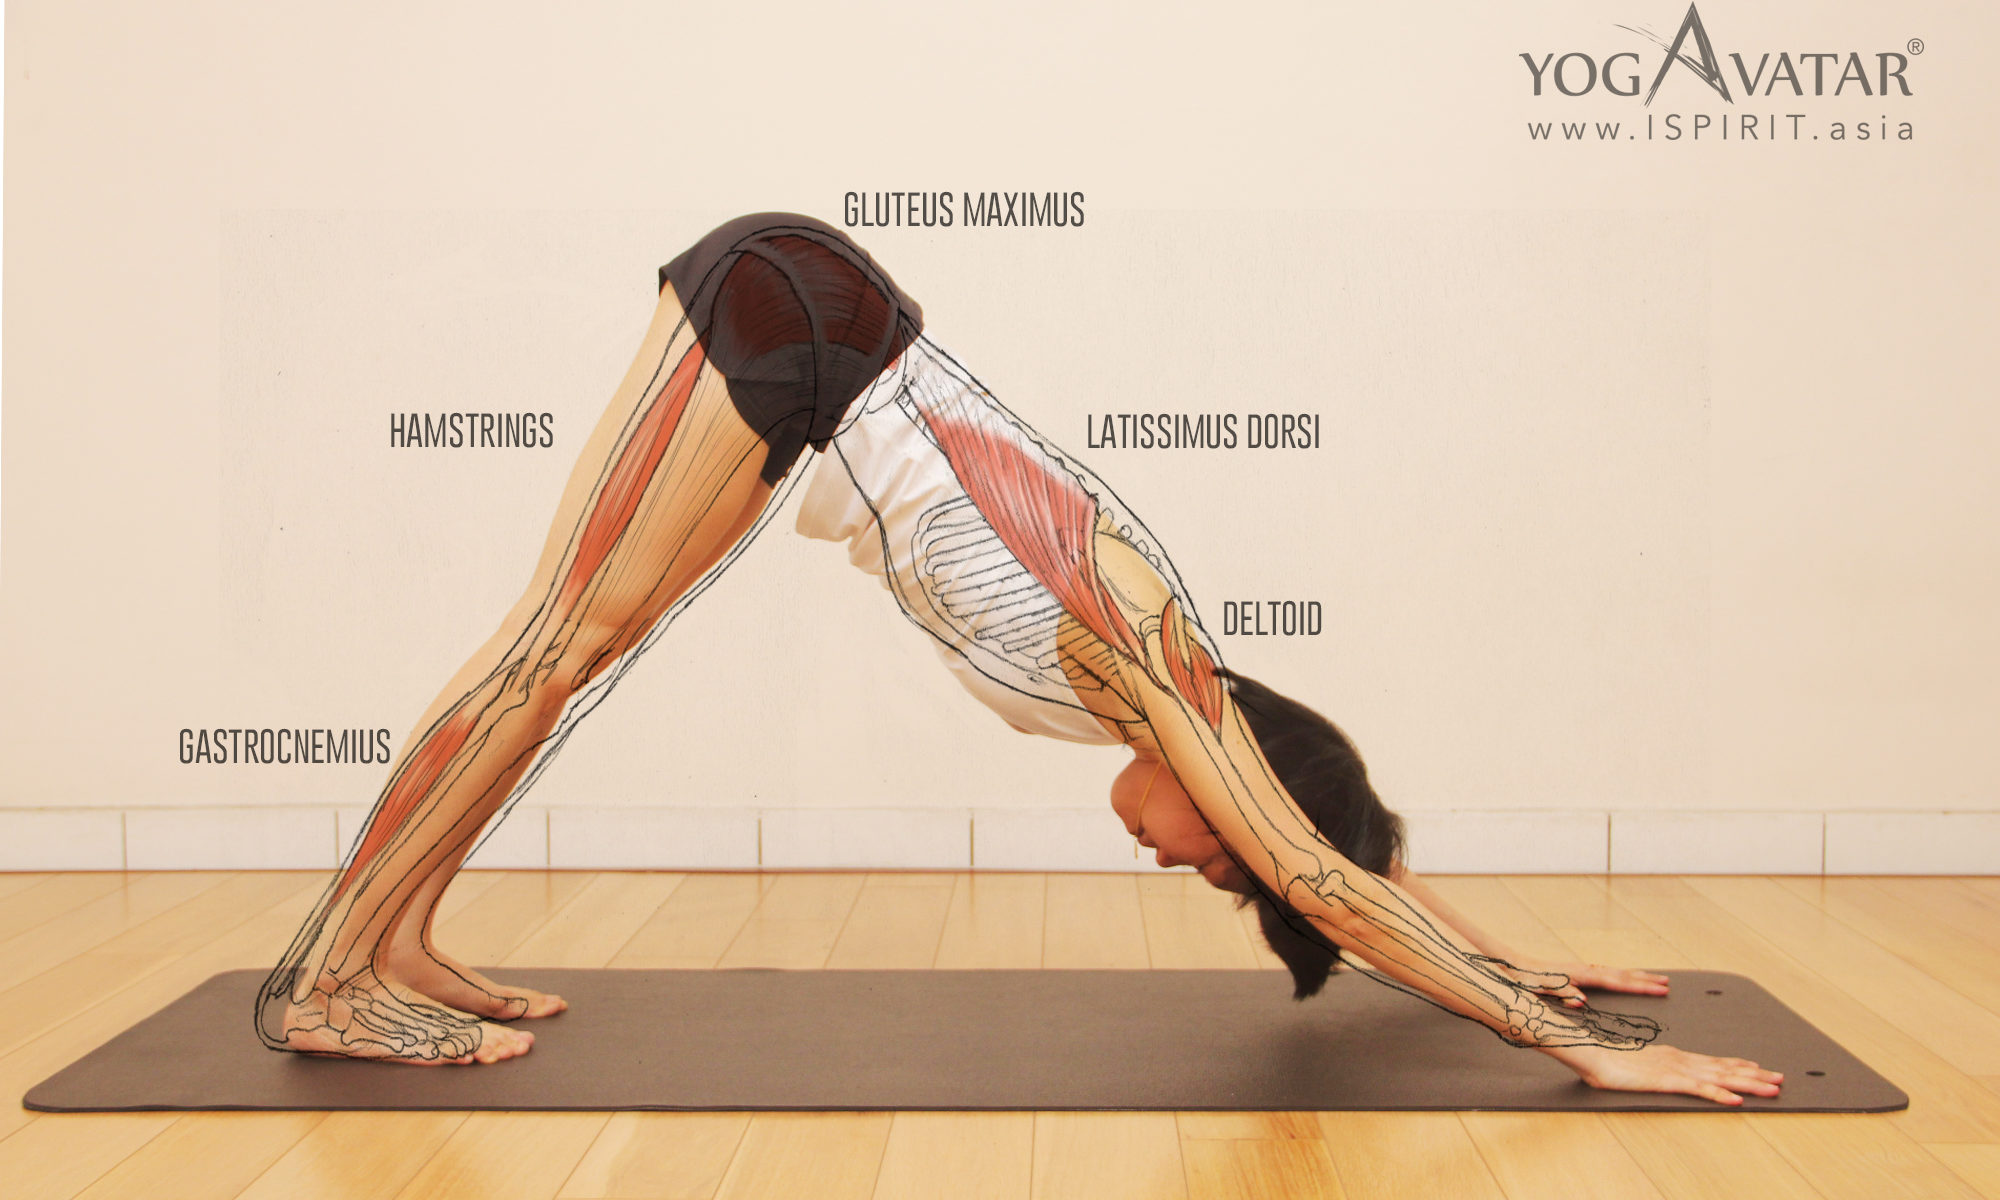 Get Your Heels Down in Downward Facing Dog – EasyFlexibility